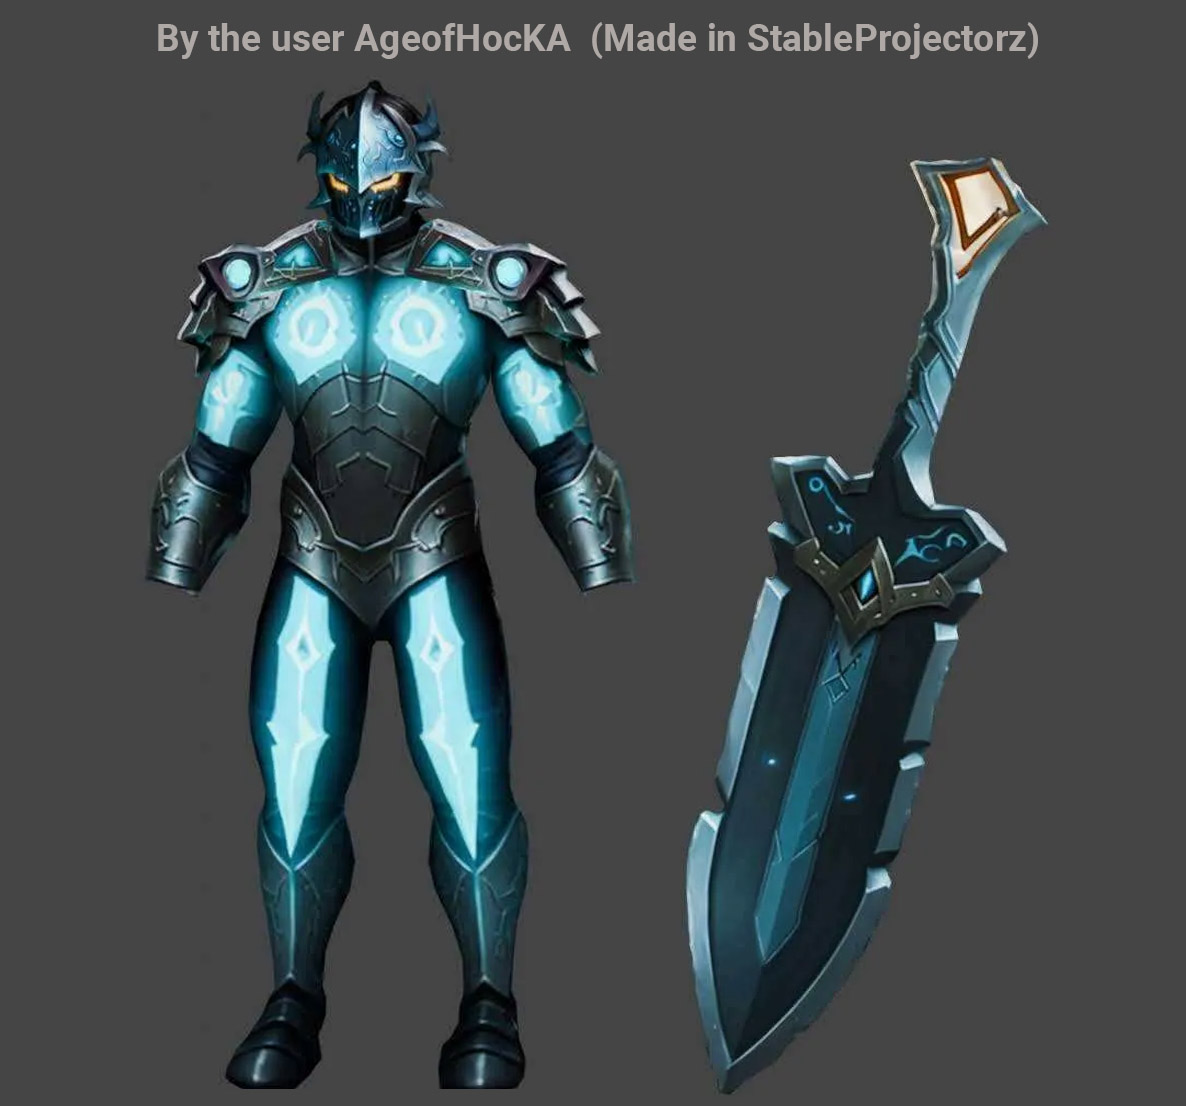 A magical knight character in glowing armor and his sword, generated in Texturing program StableProjectorz powered by the AI